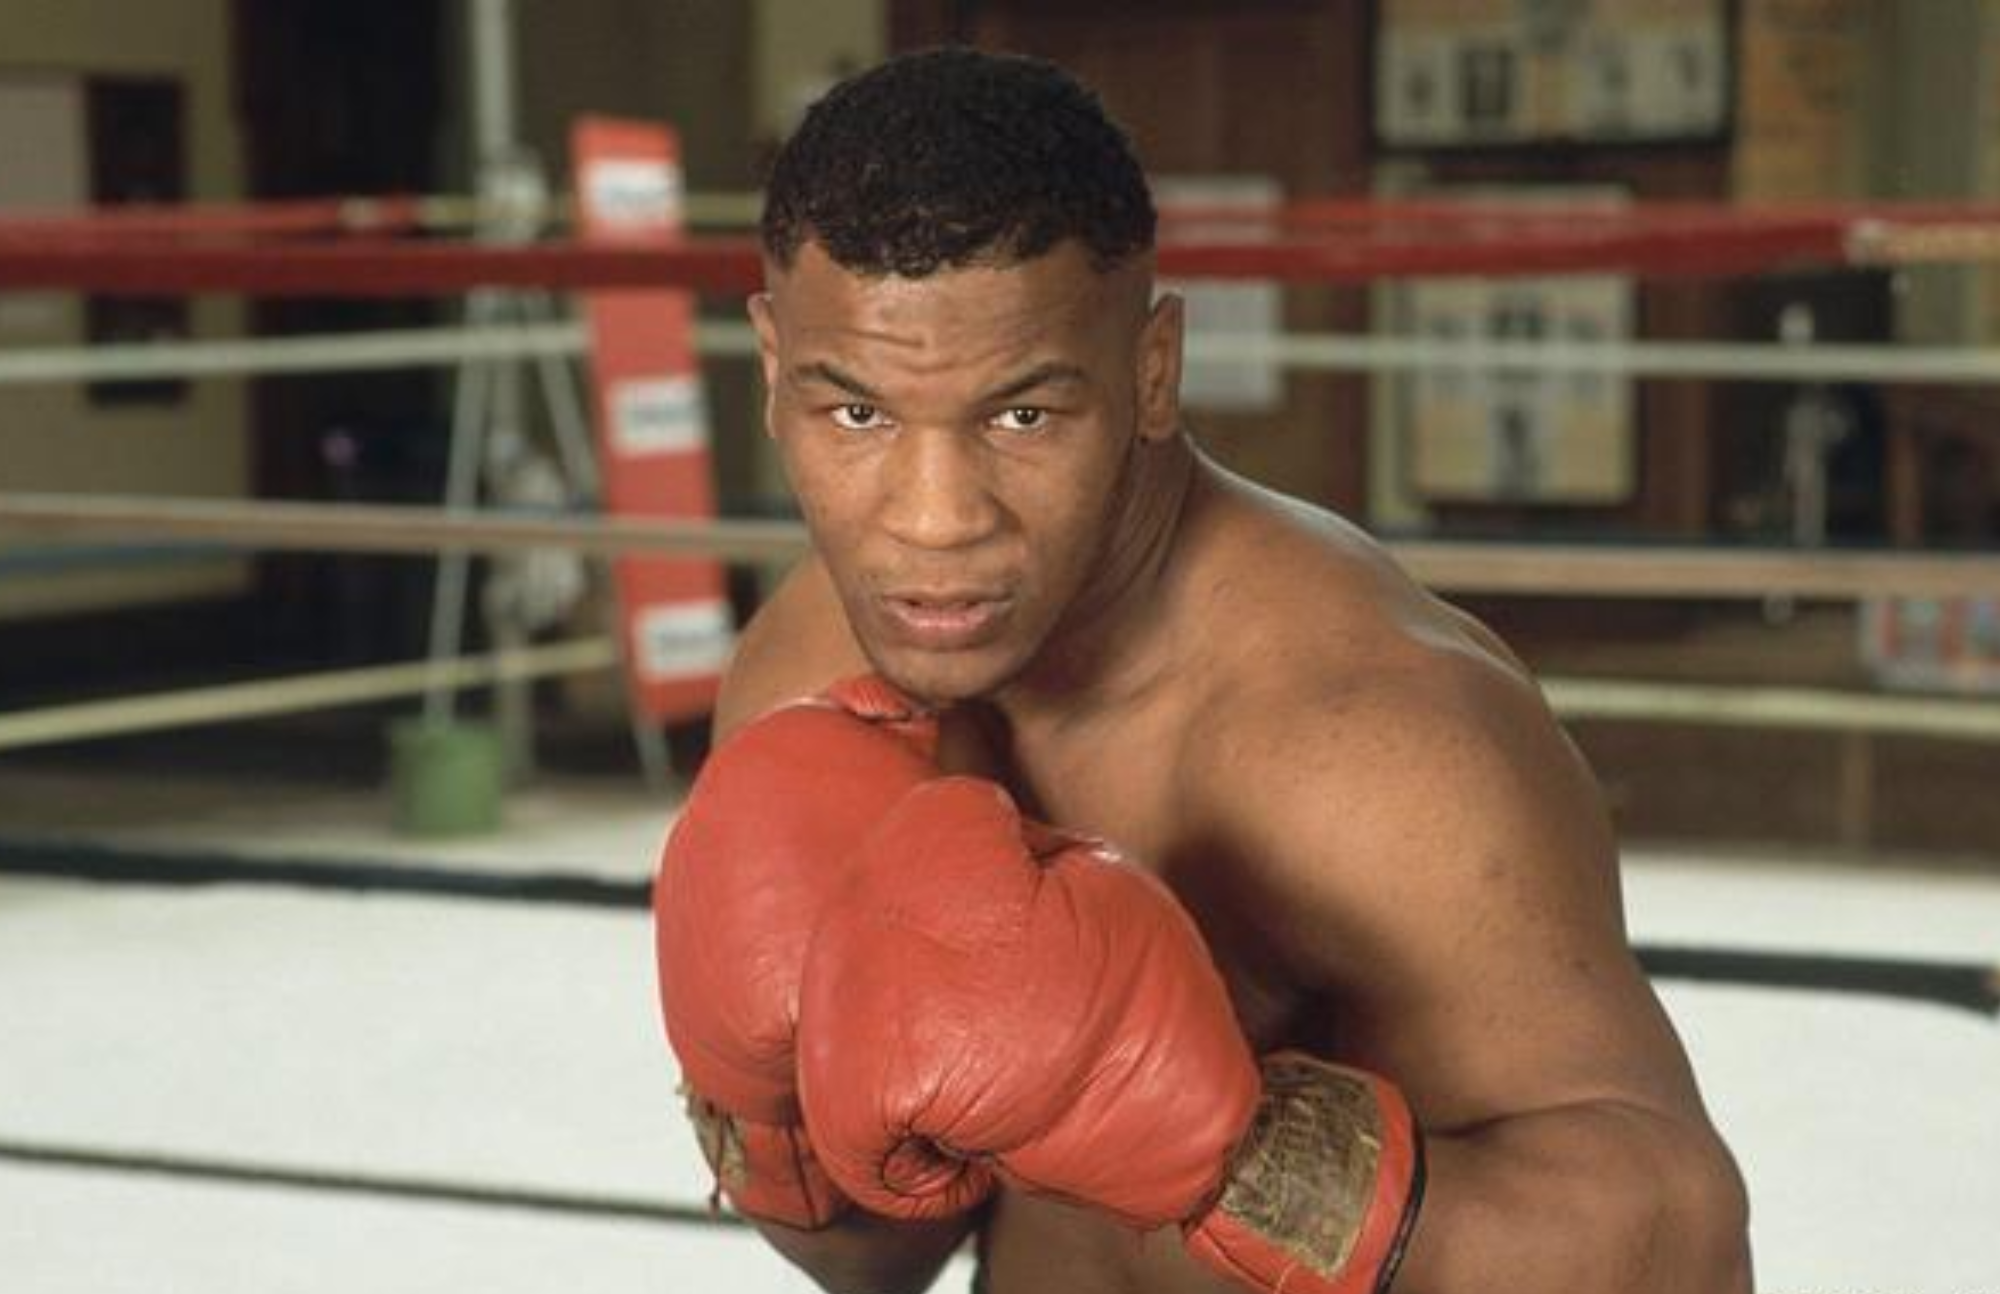 Mike Tyson poses while wearing his red boxing gloves